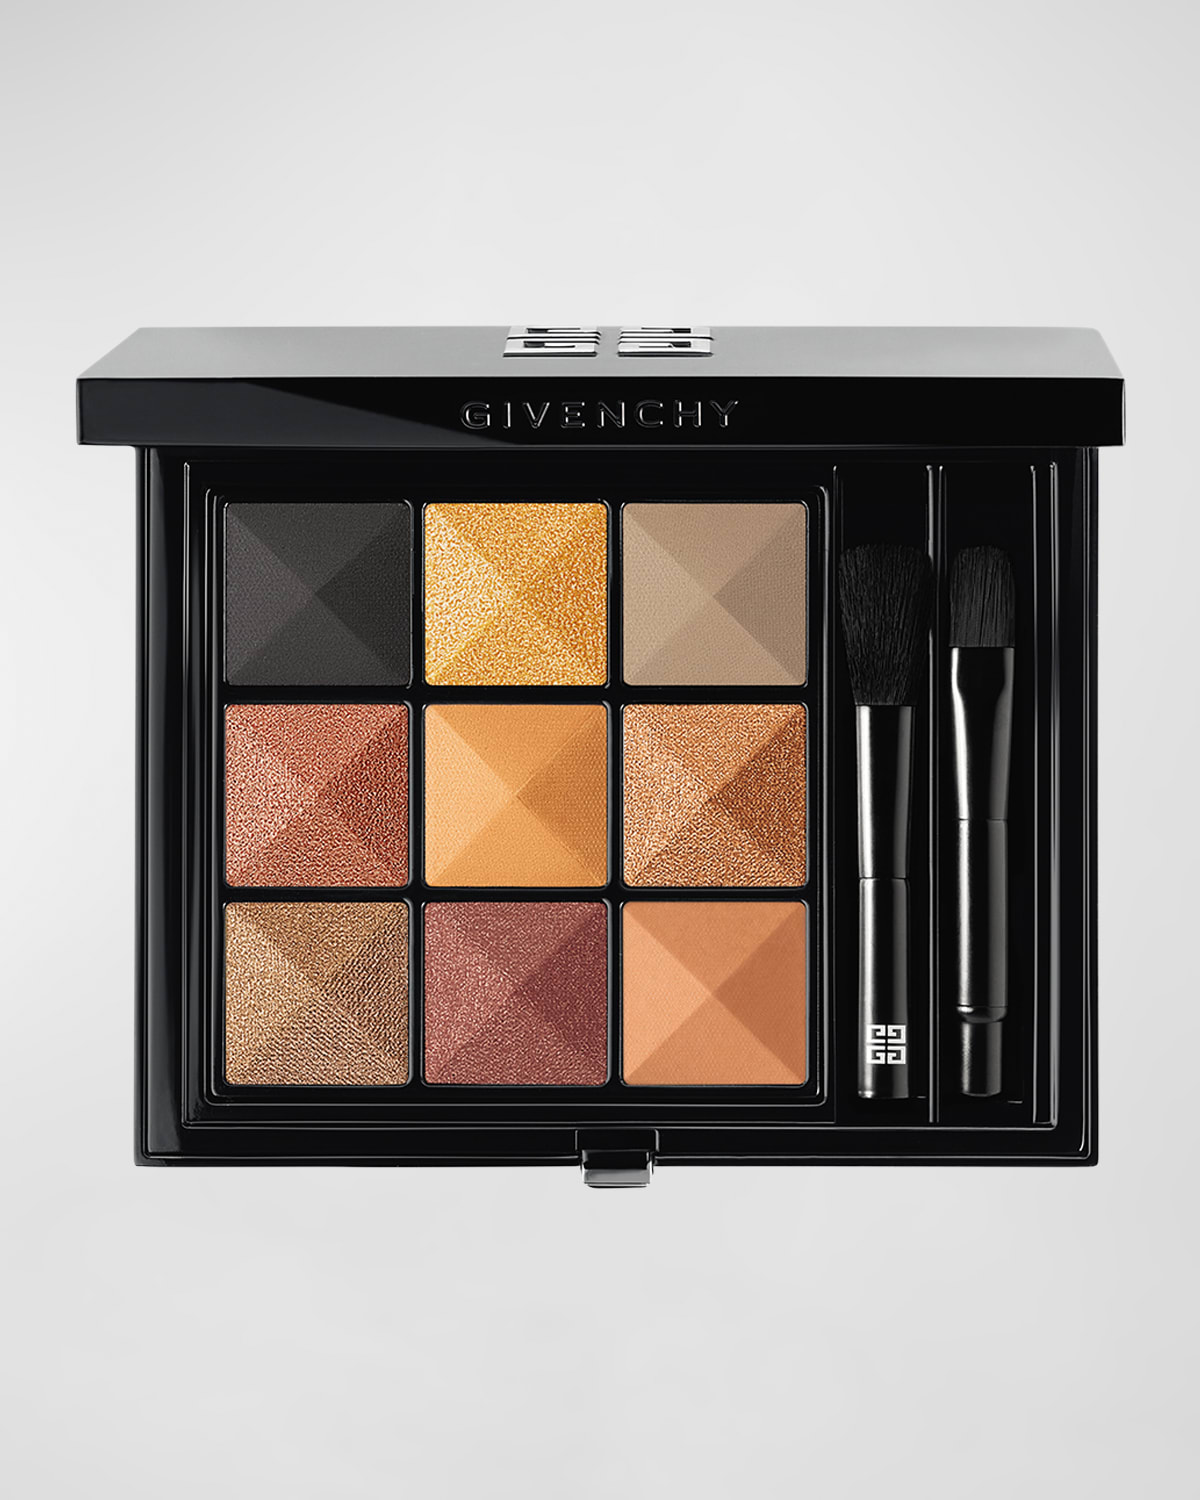 Givenchy Le 9 De  Eyeshadow Palette, 9.08